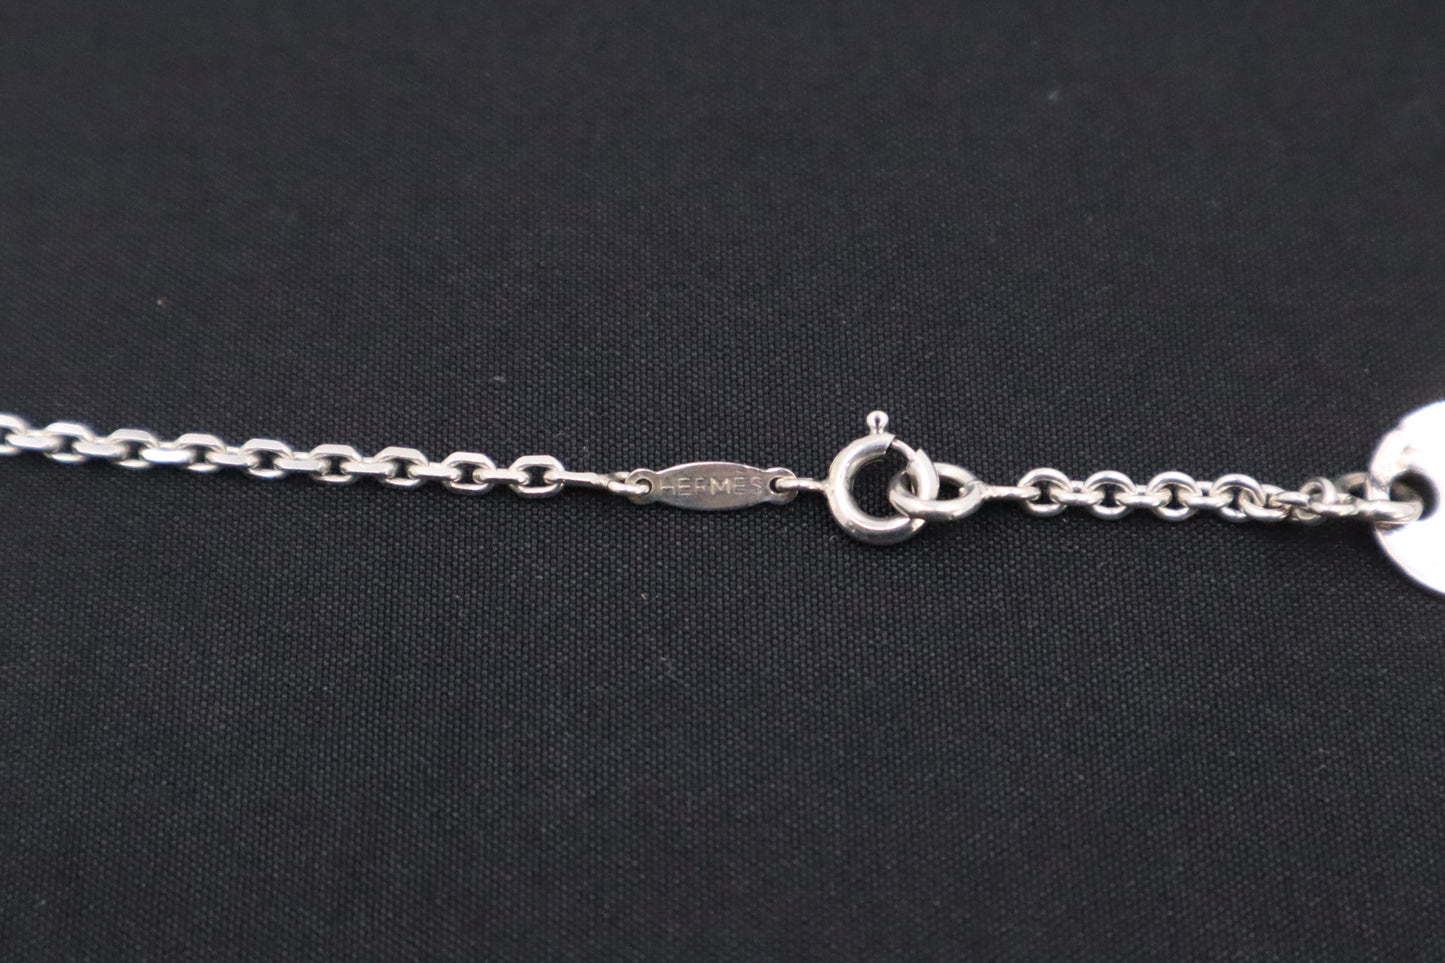 Hermes Key Necklace in Sterling Silver